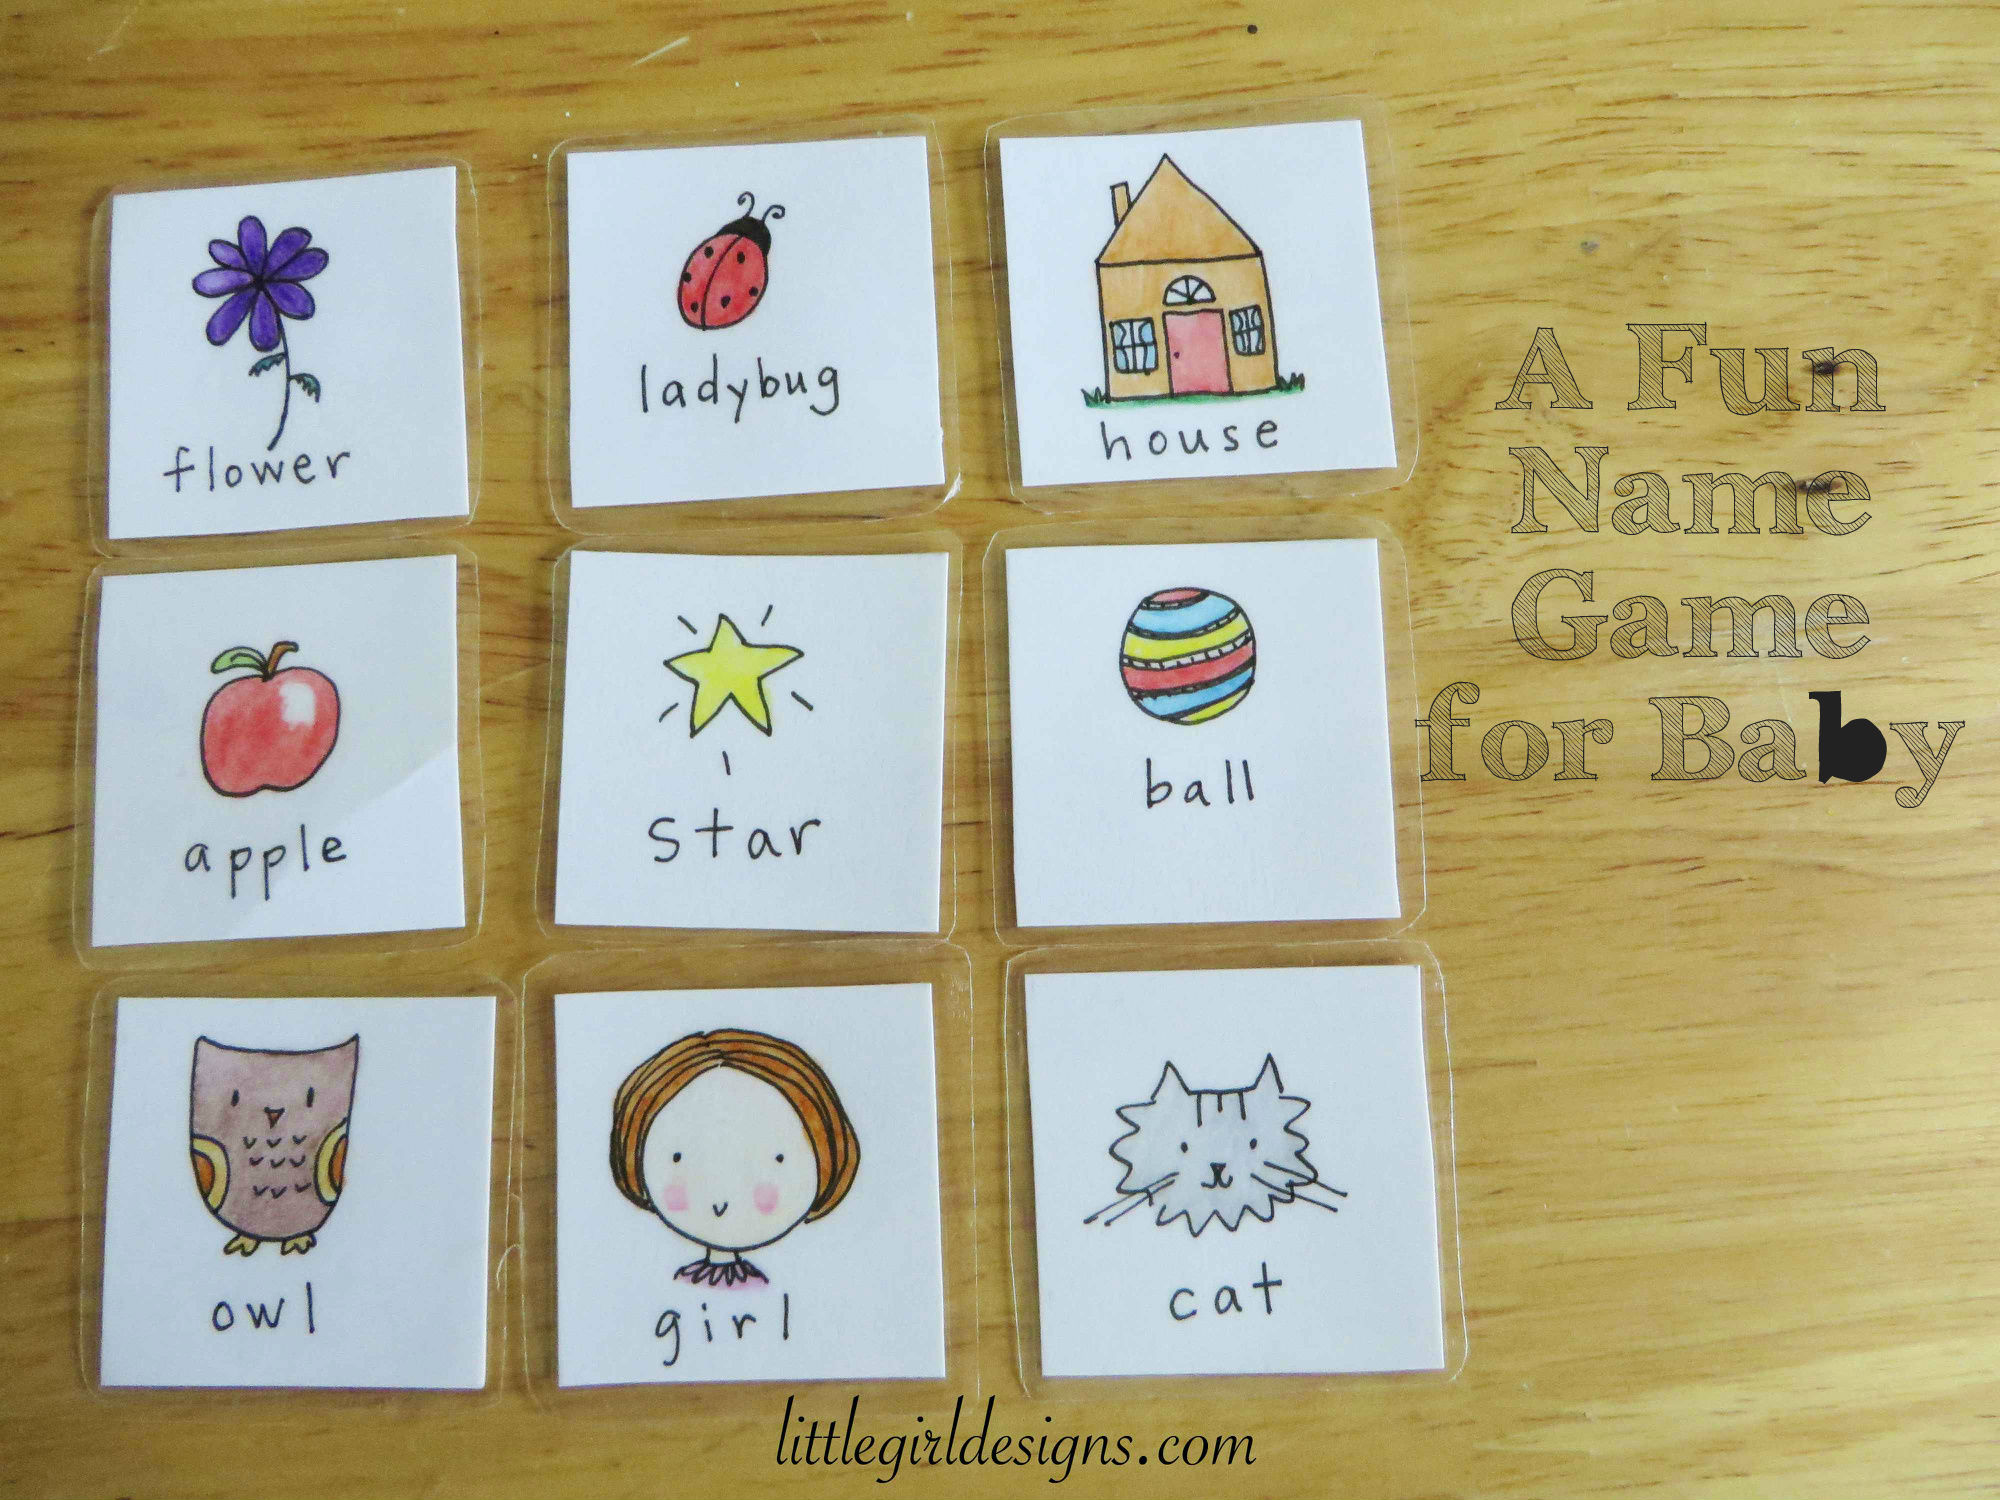 Square cards with sketches of objects for baby to name like cat and girl.